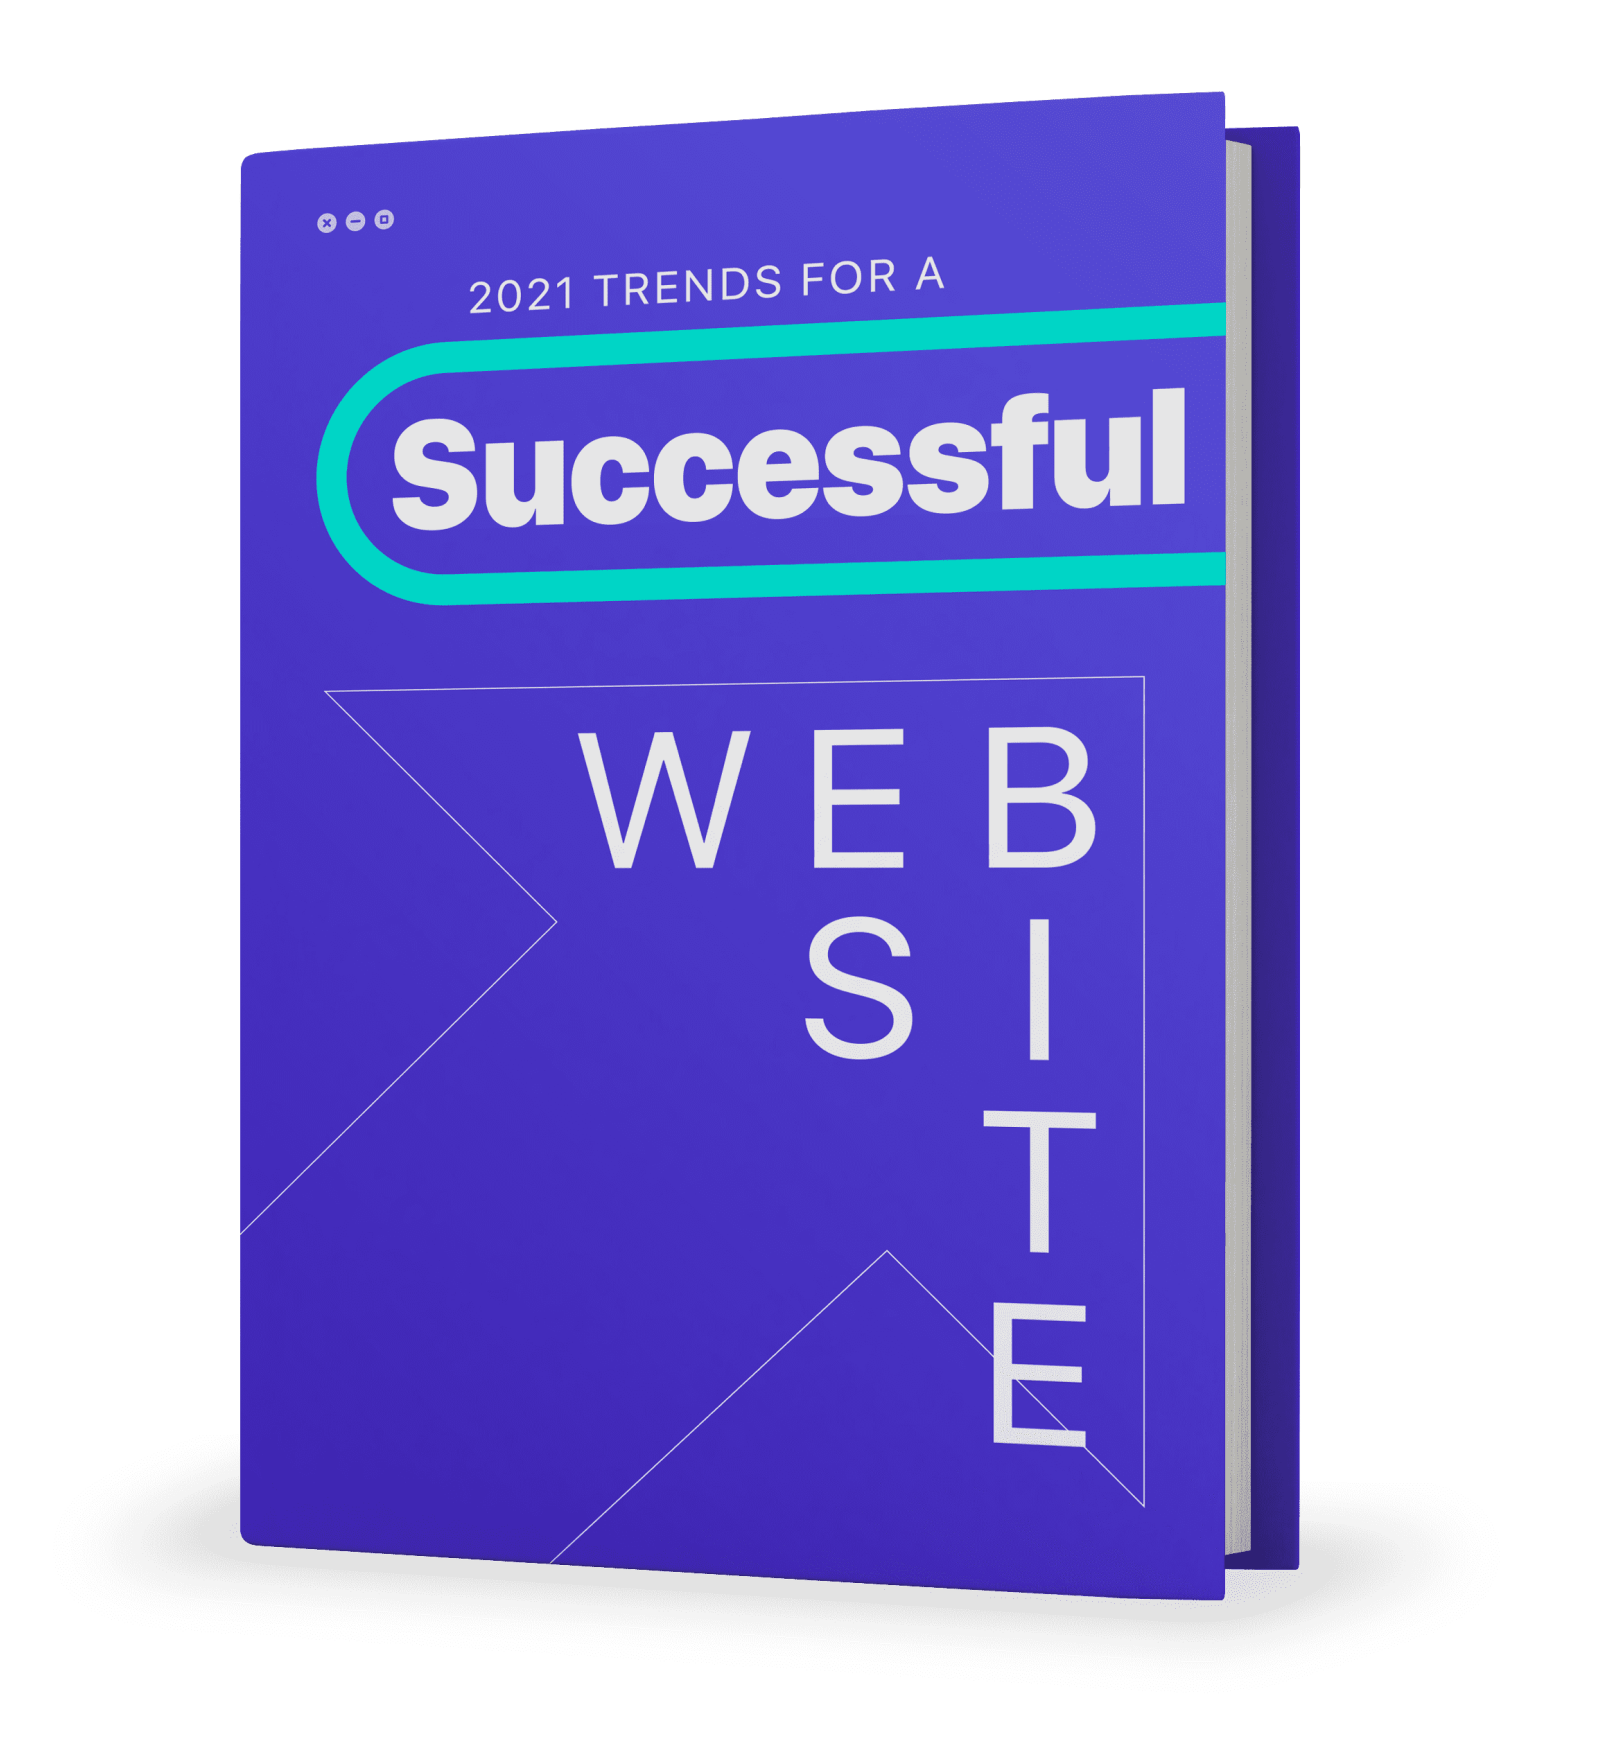 2021 Trends for a Successful Website